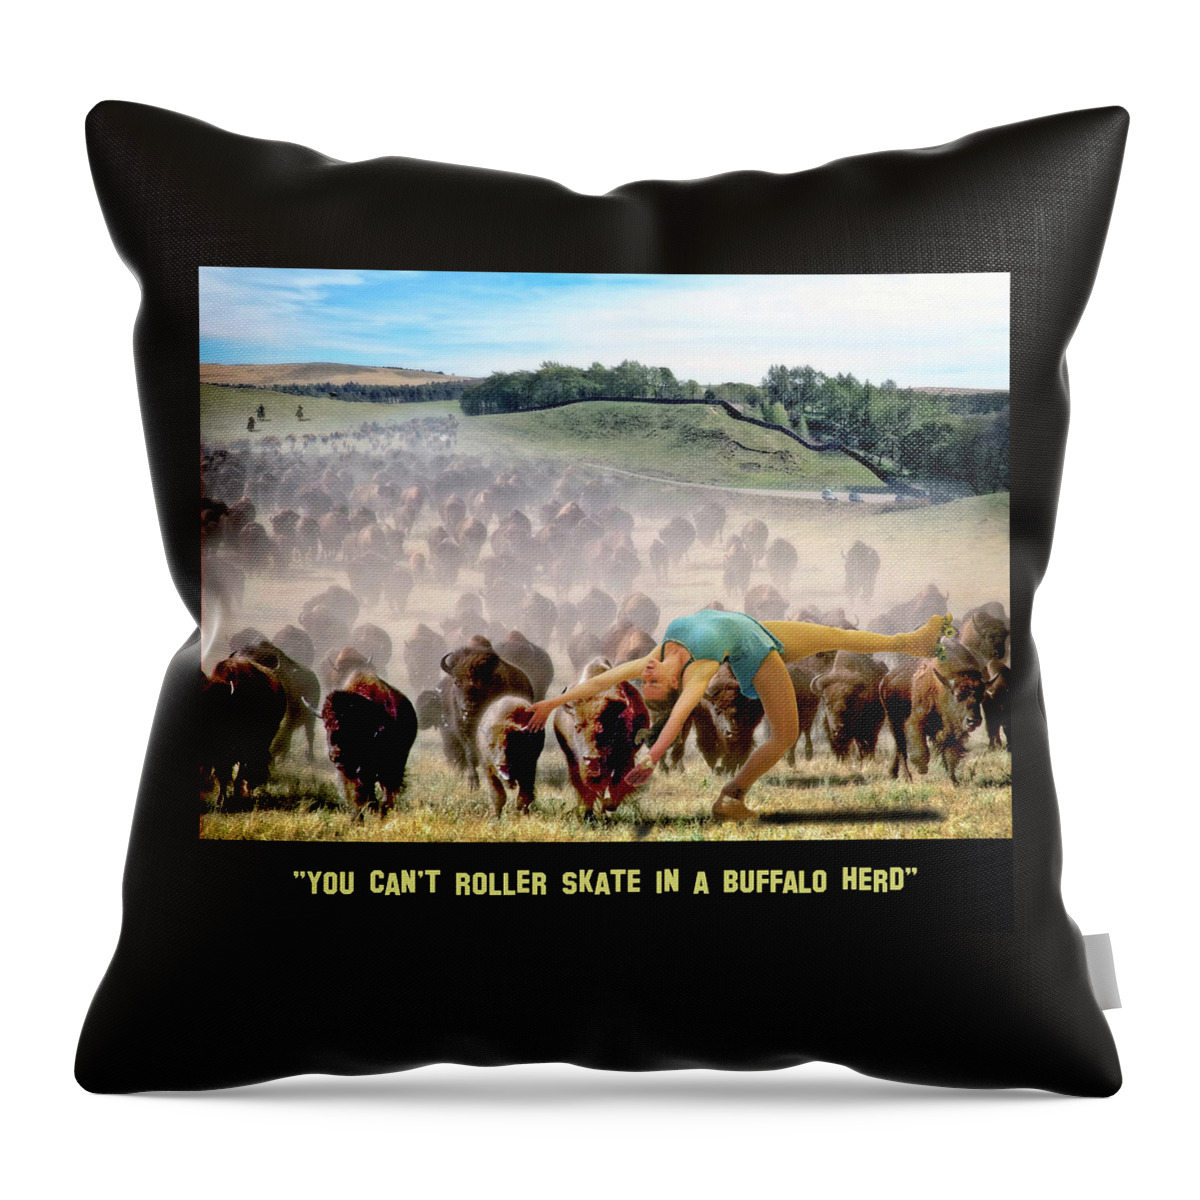 2d Throw Pillow featuring the digital art You Can't Roller Skate In A Buffalo Herd by Brian Wallace